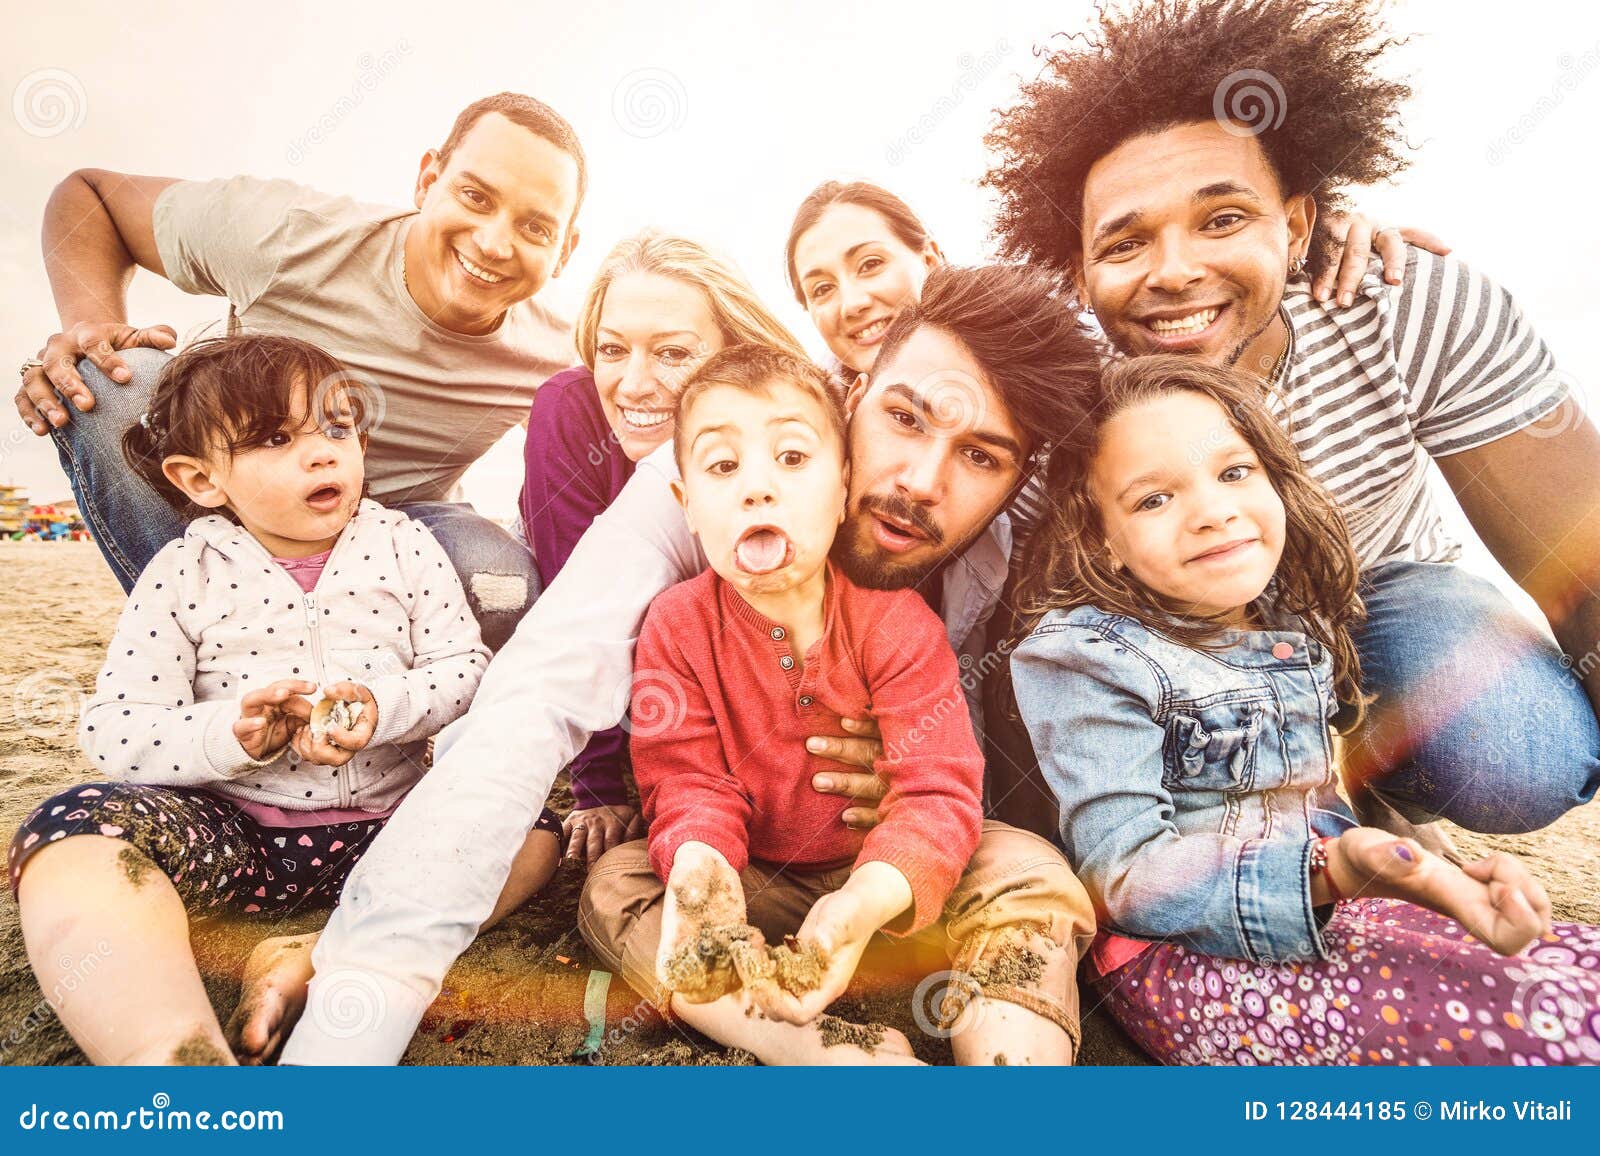 happy multiracial families taking selfie at beach making funny faces